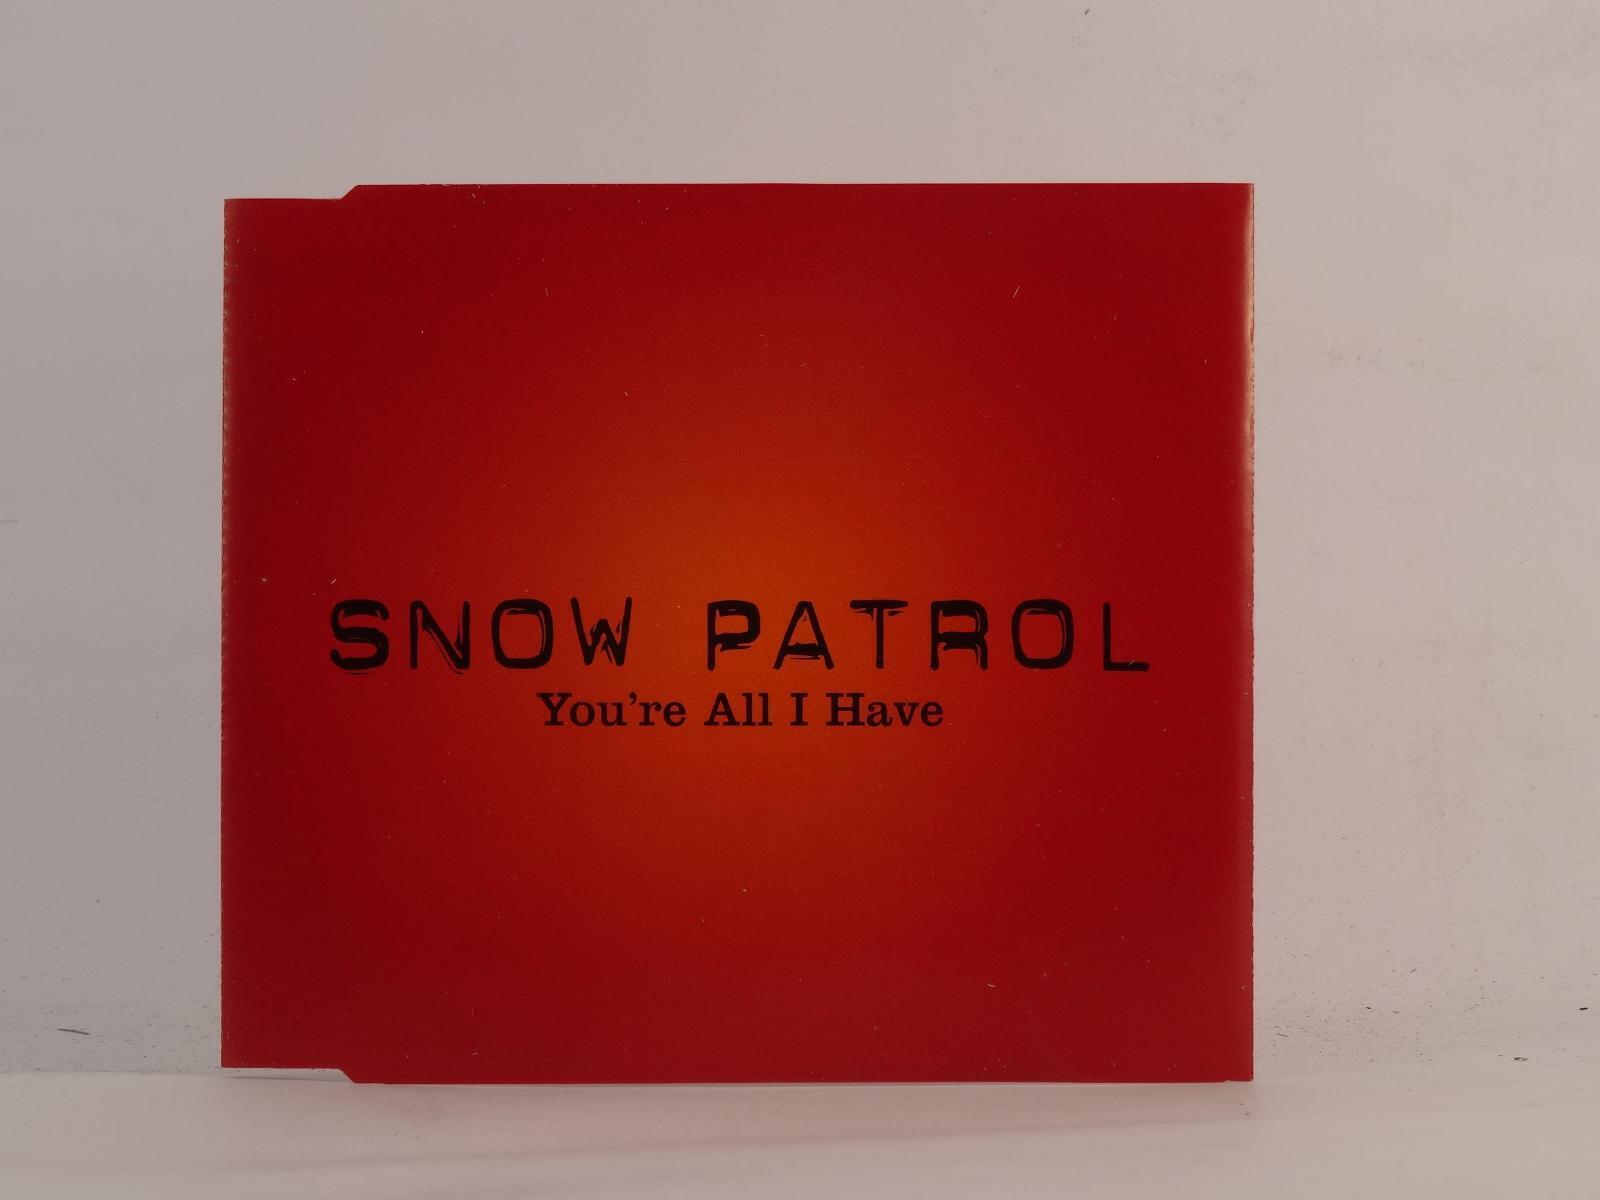 SNOW PATROL YOU'RE ALL I HAVE (E51) 1 Track Promo CD Single Picture Sleeve FICTI